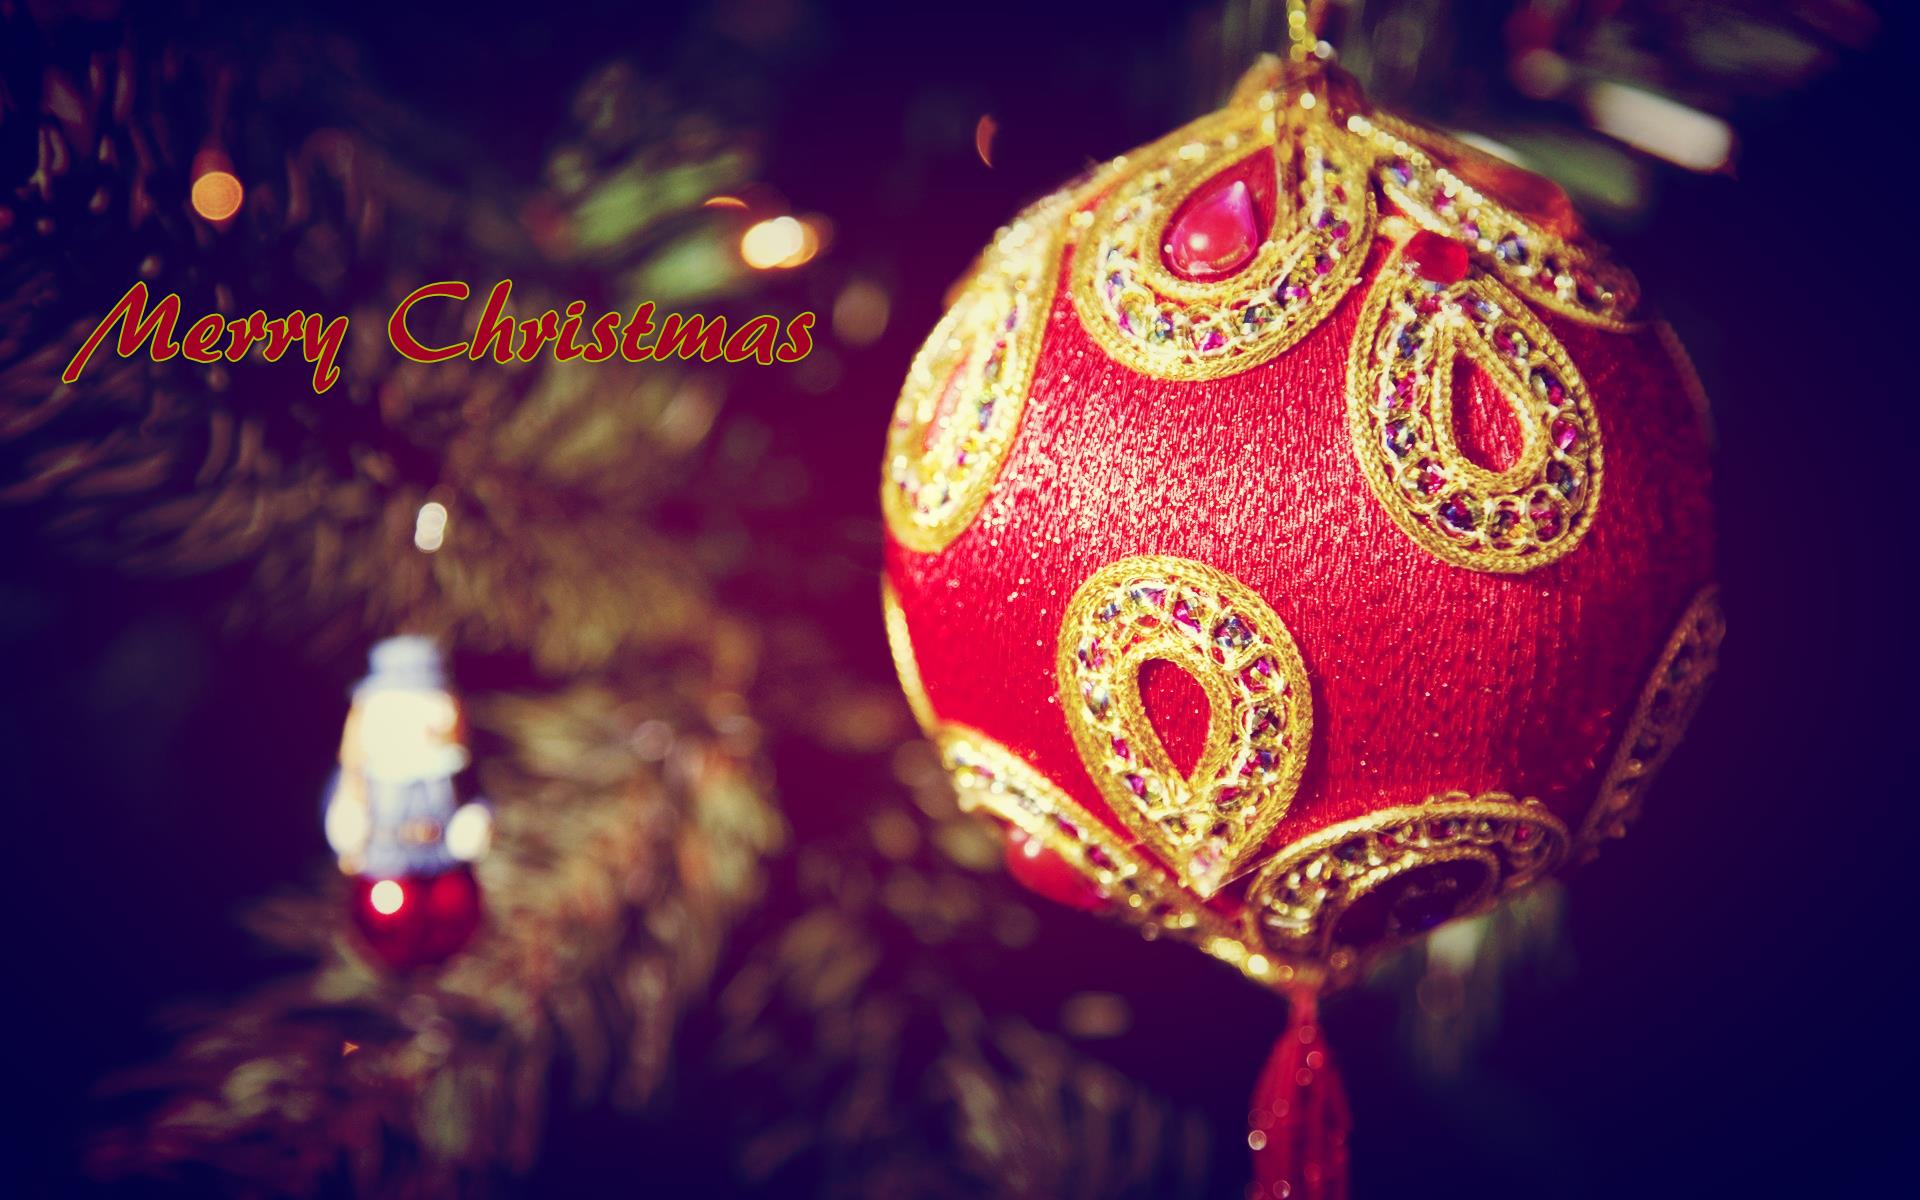 Merry Christmas HD Wallpaper Free Merry Christmas HD Background